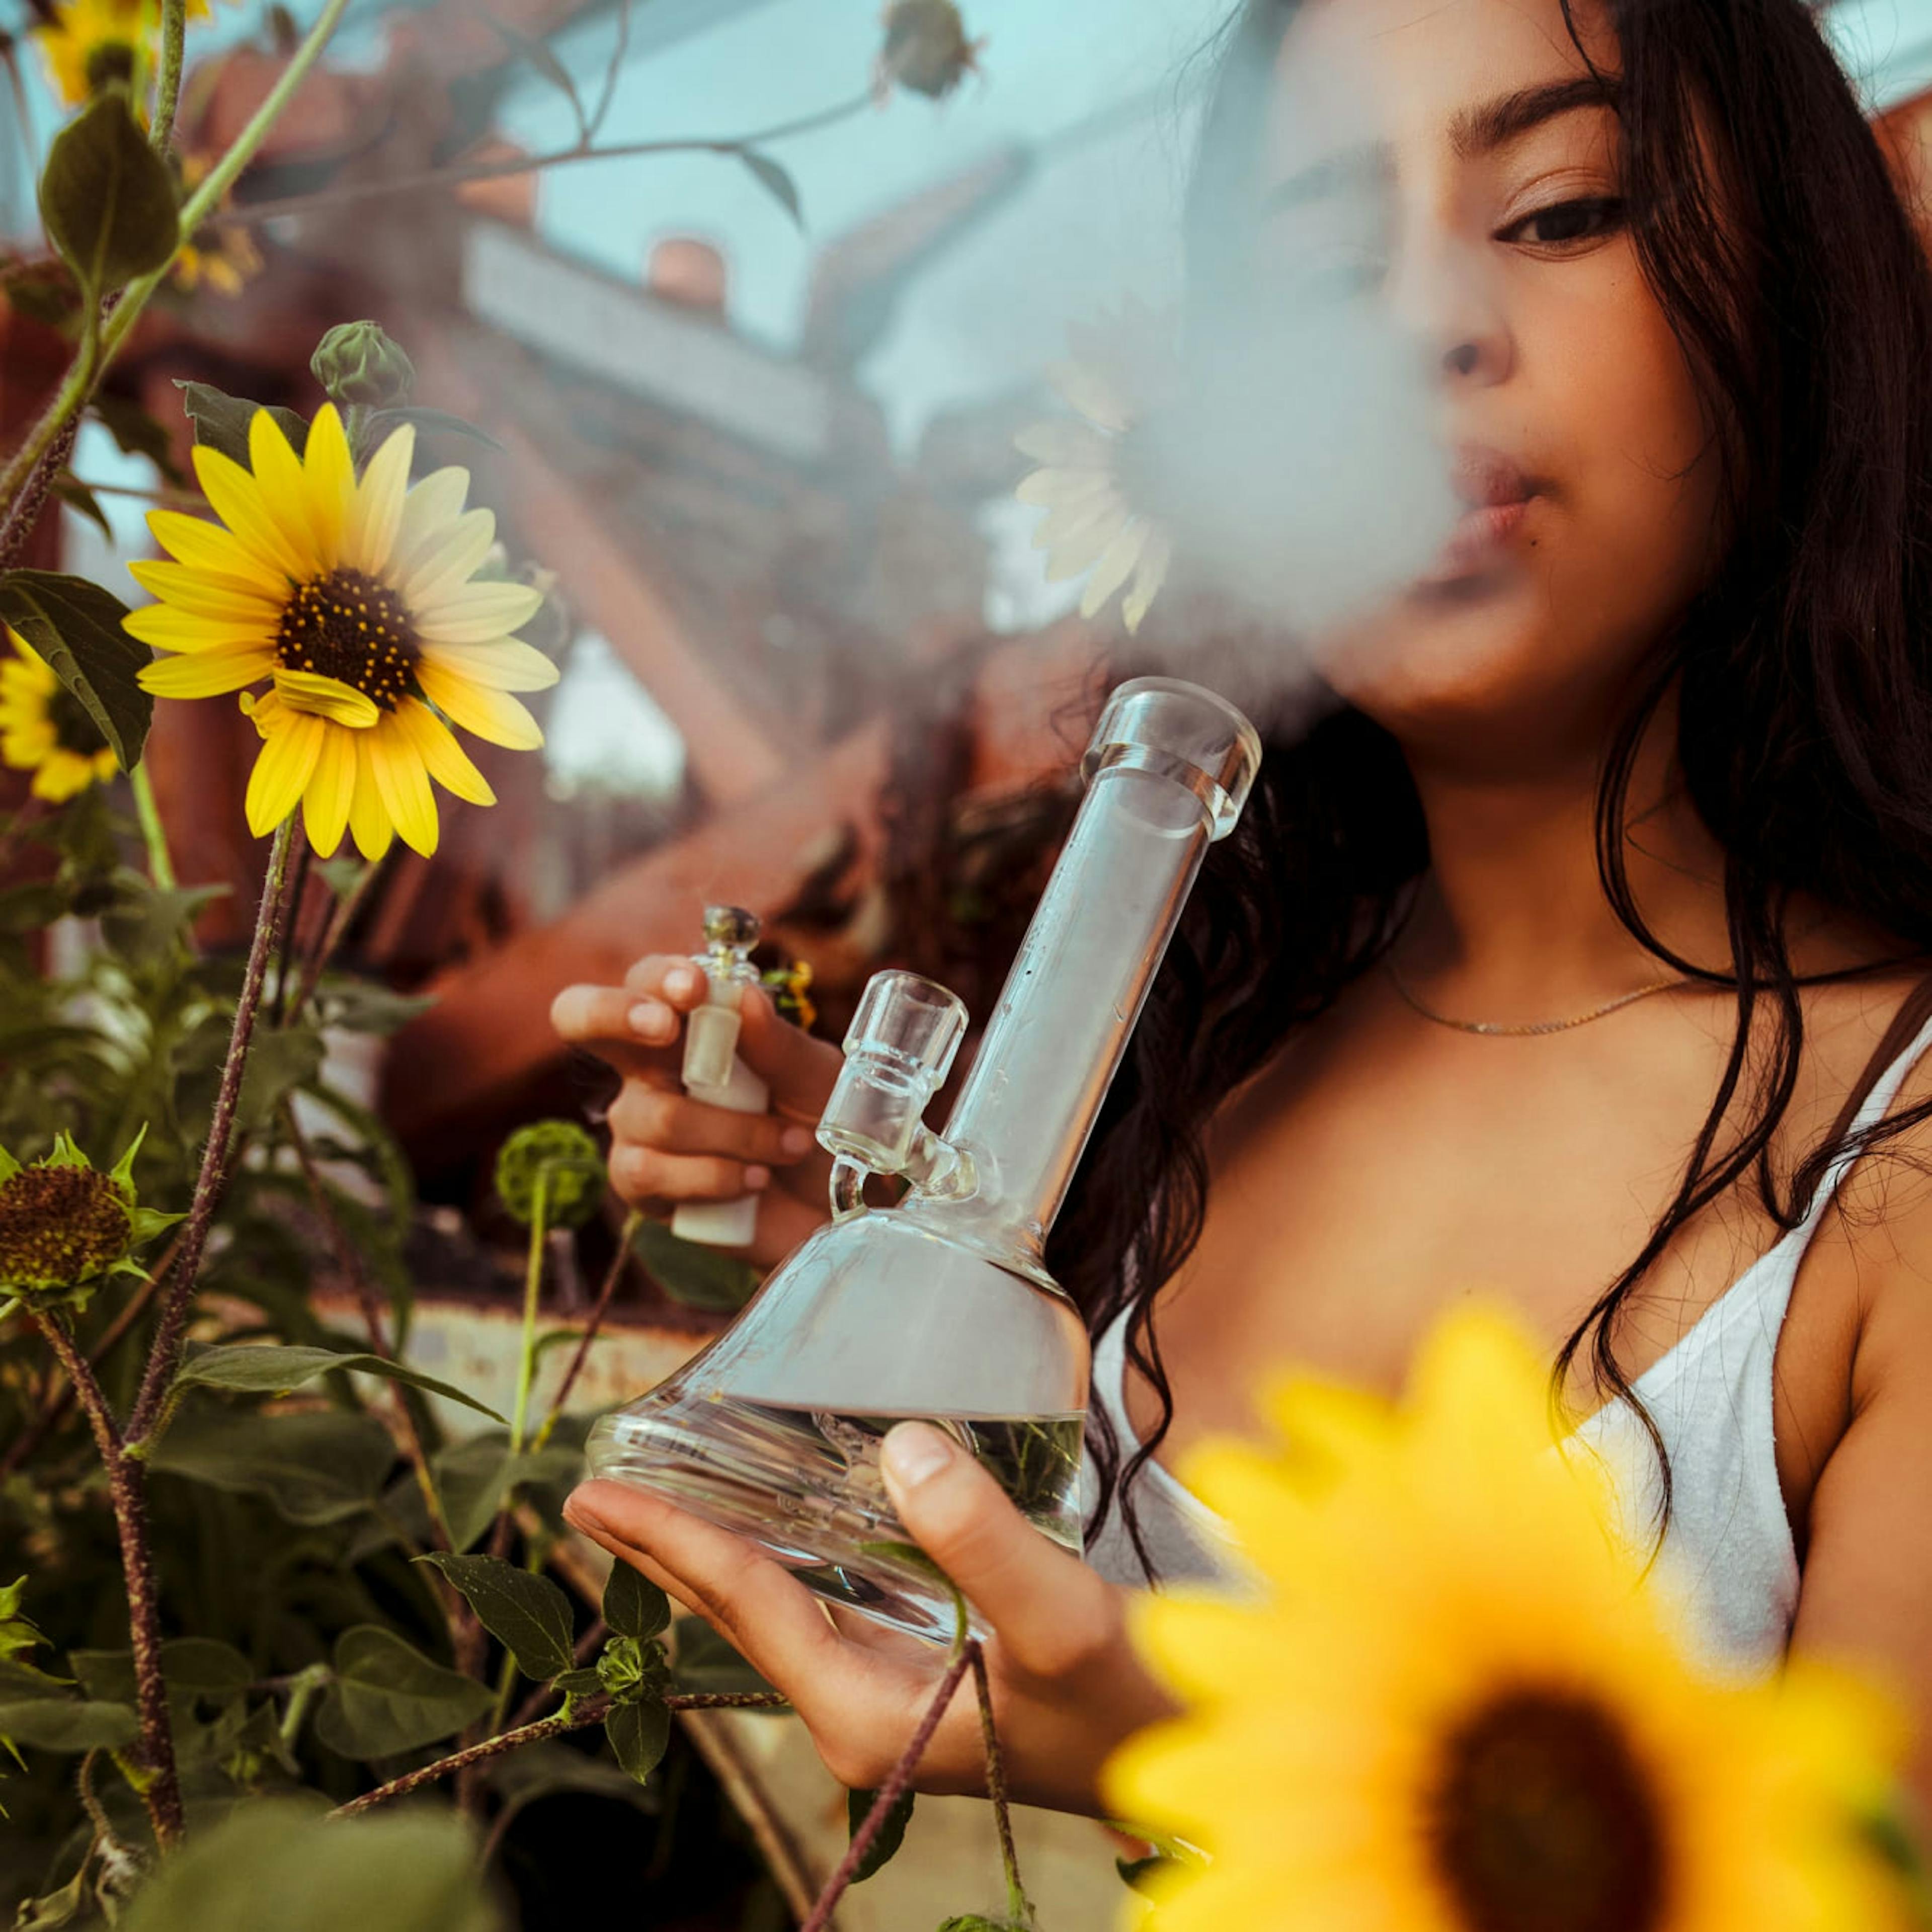 A young woman smokes weed from a bong in the California desert.